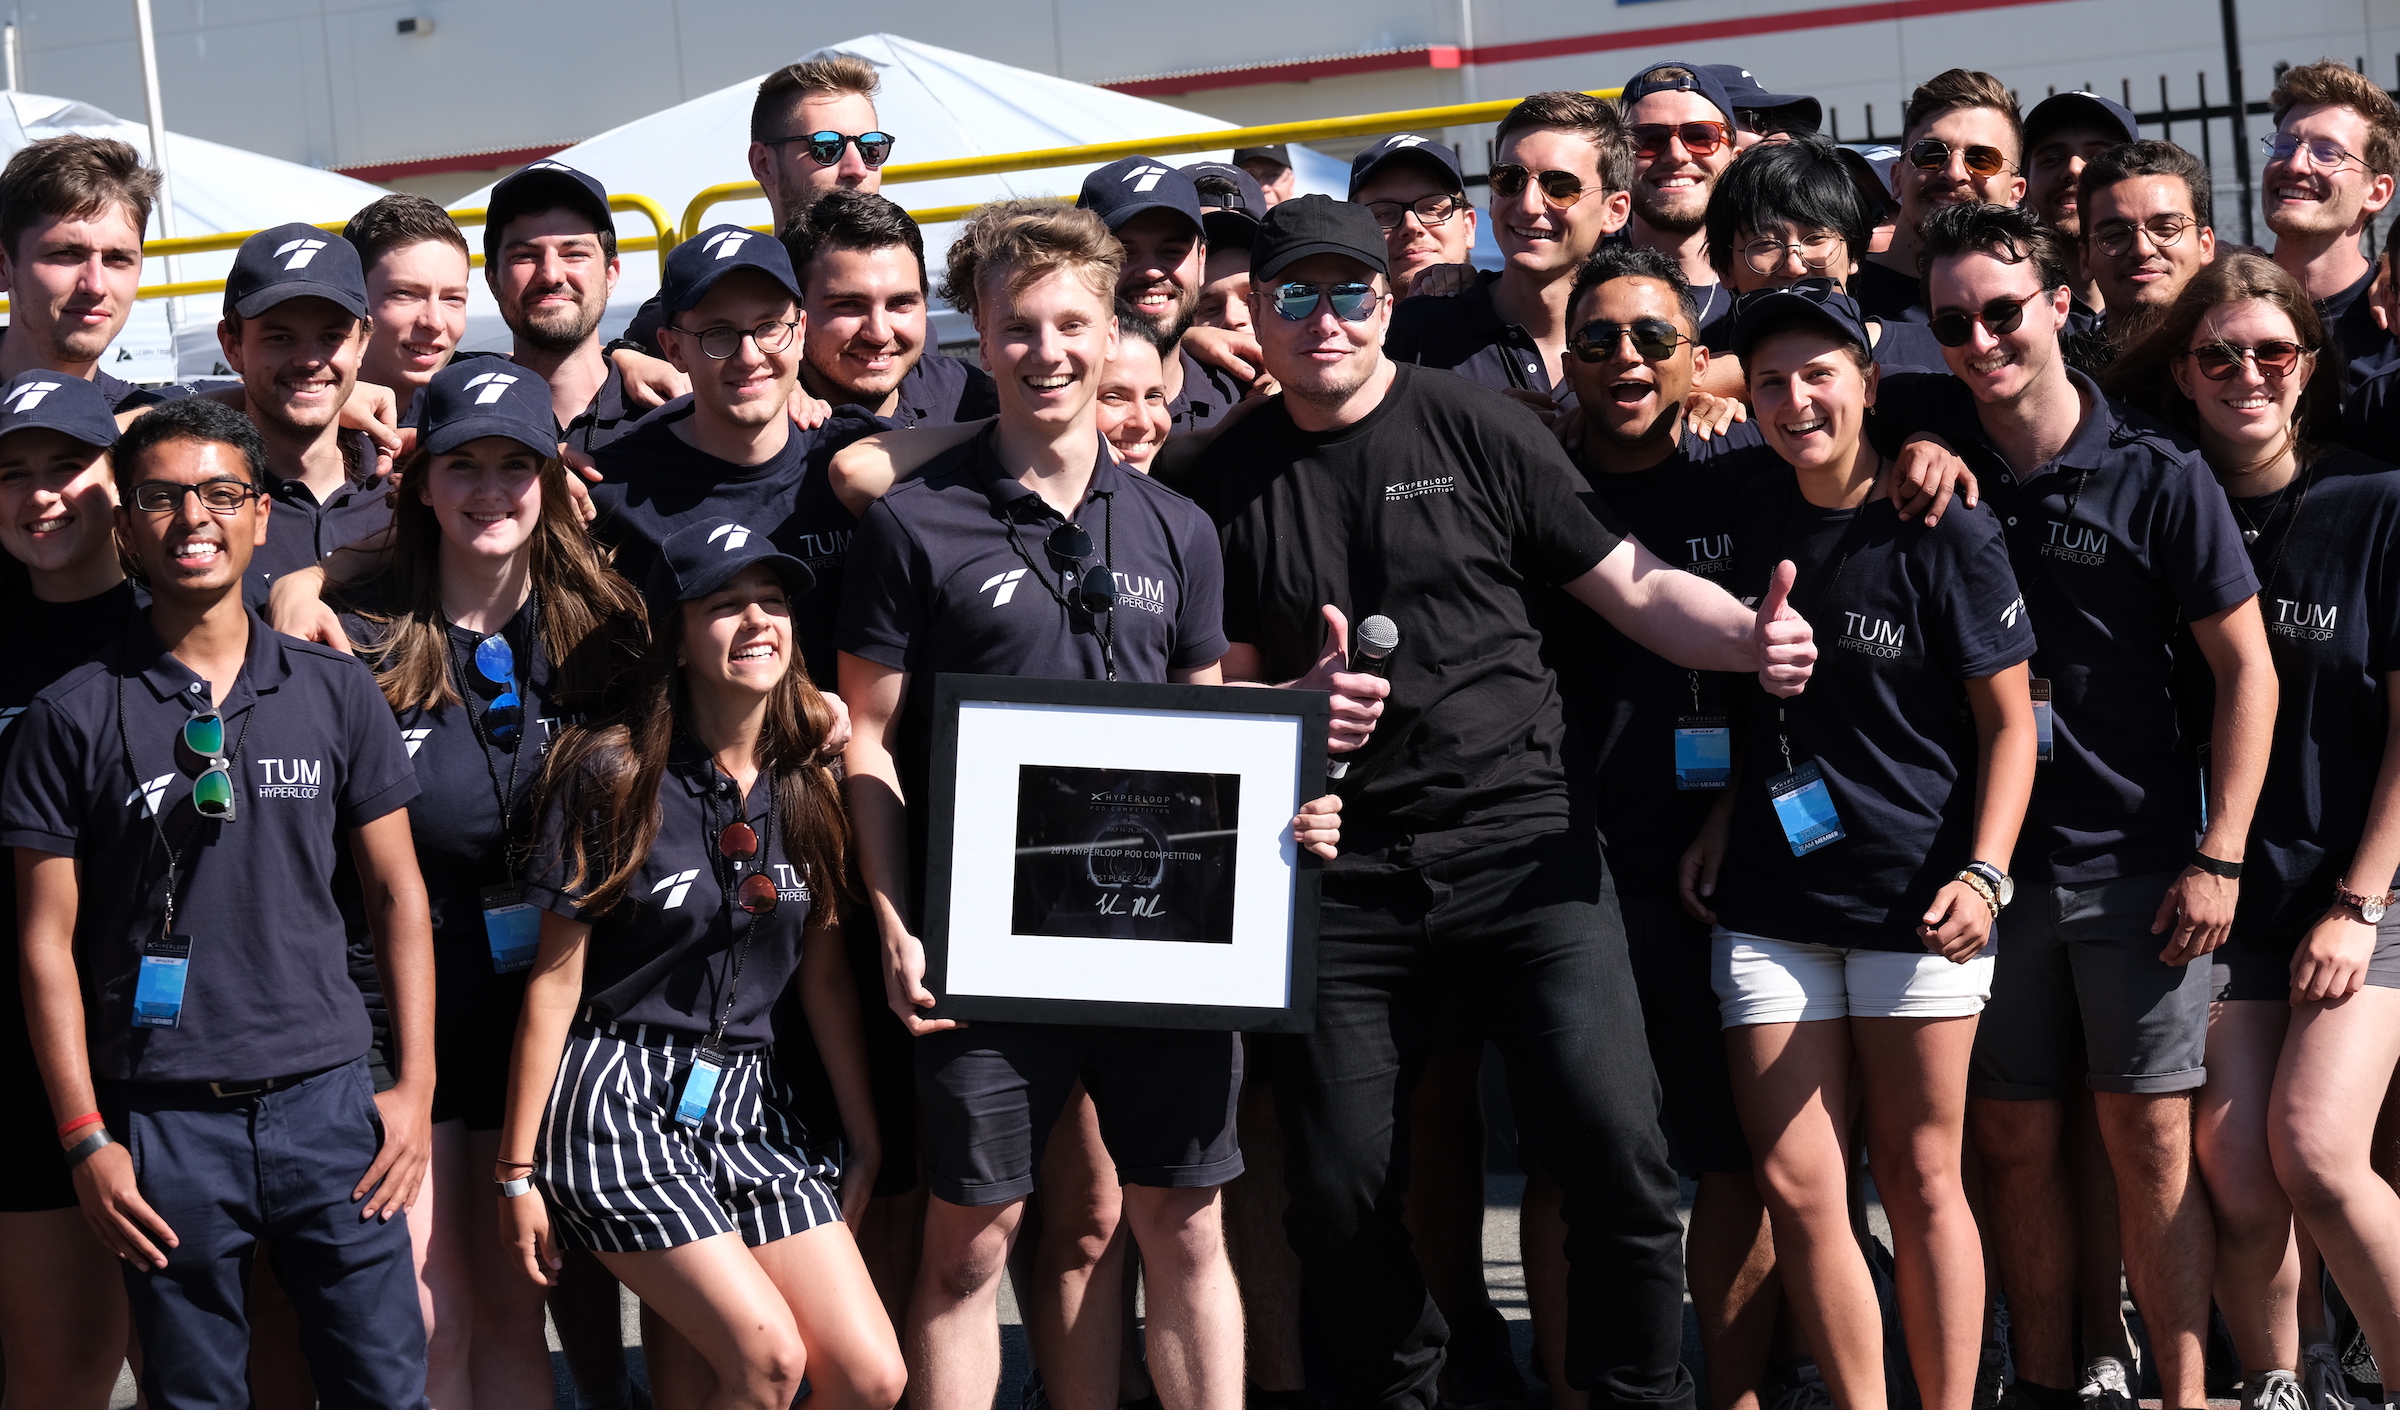 Team TUM wins SpaceX Hyperloop Pod Competition with record 288 mph top speed